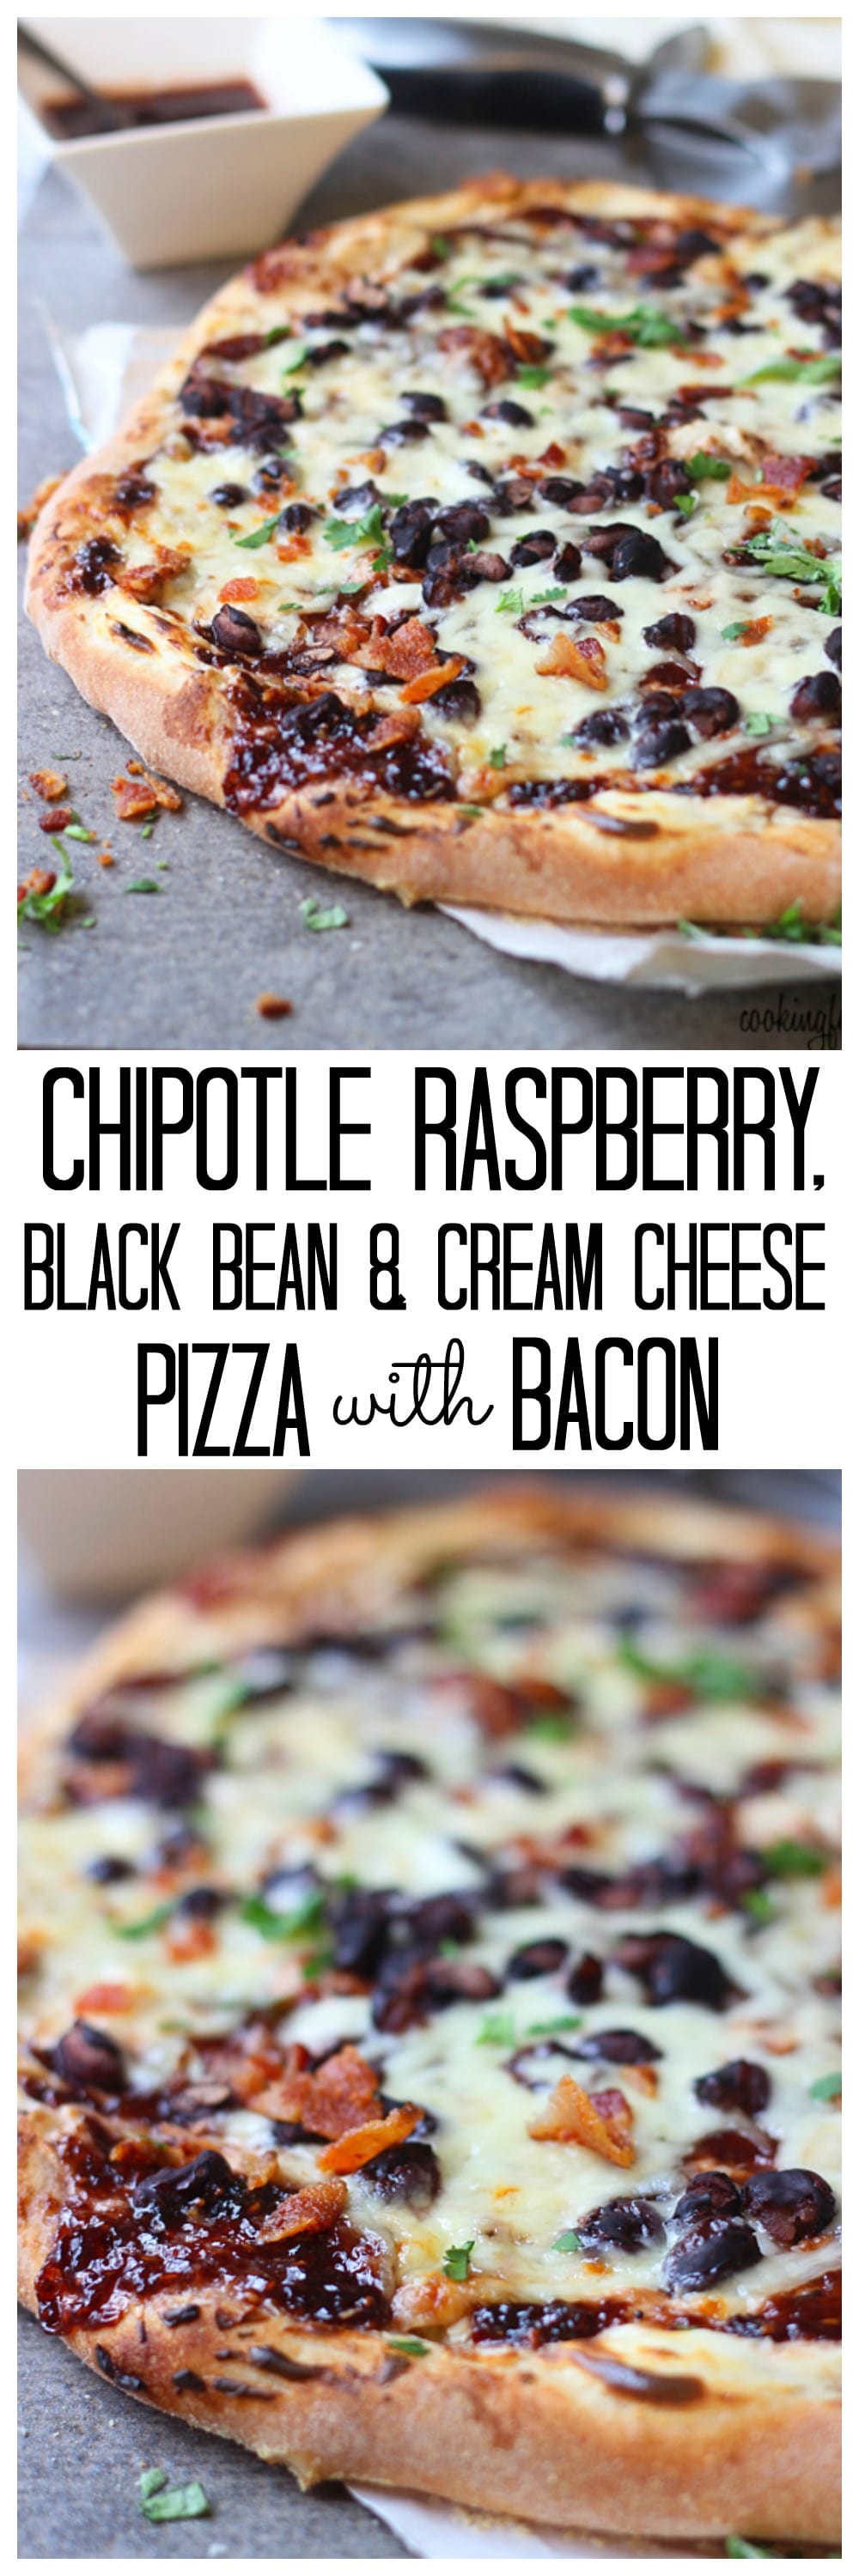 Chipotle, Black Bean and Cream Cheese Pizza with Bacon